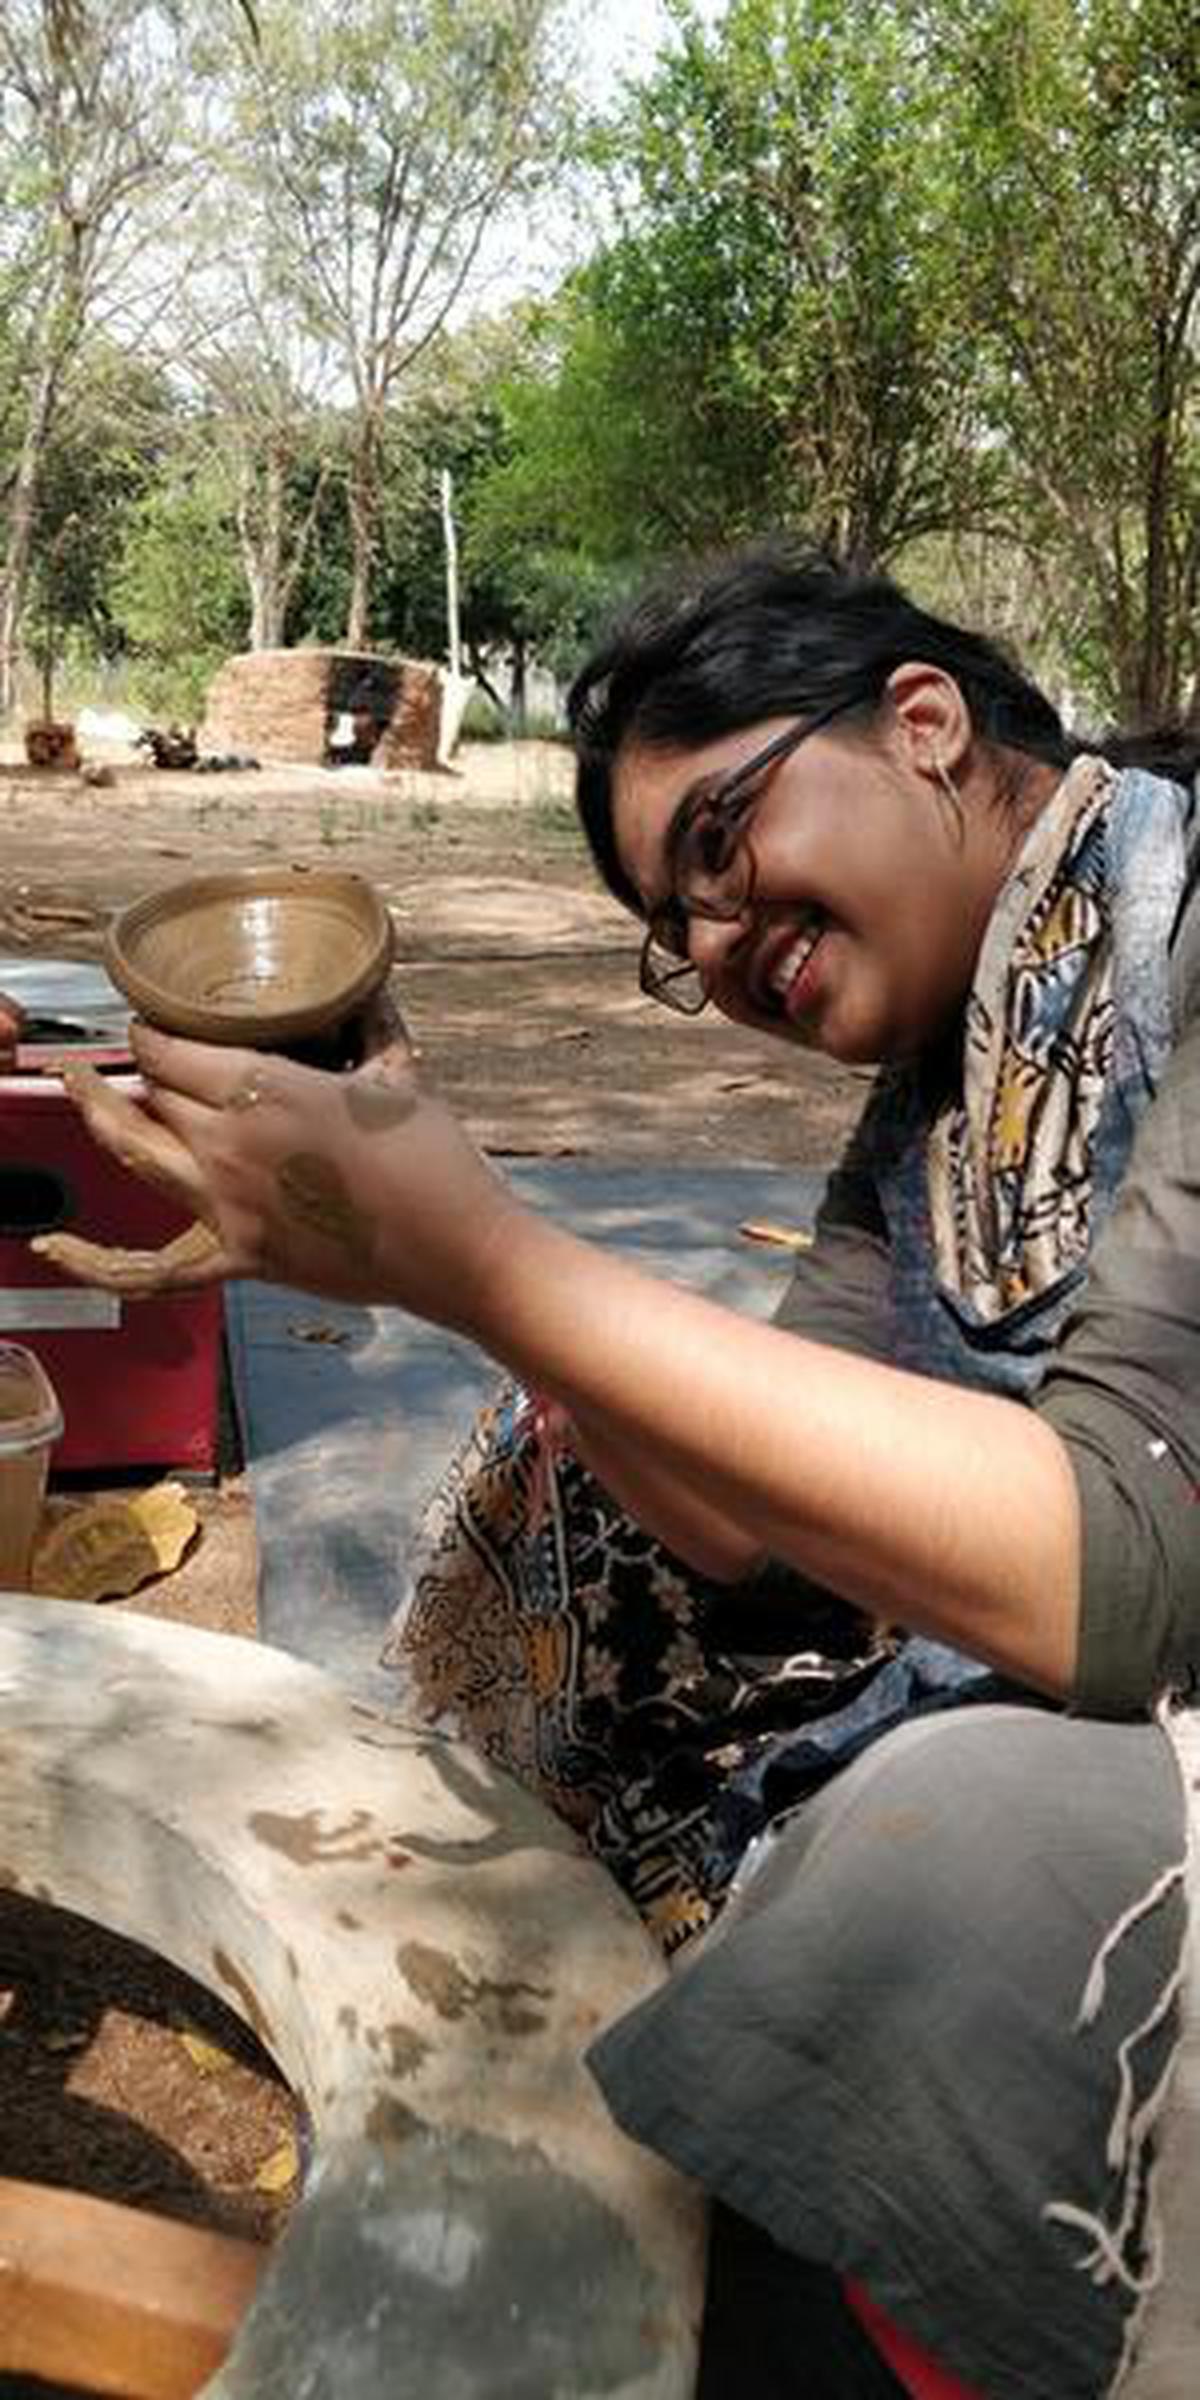 Jahnavi, a participant, trying her hand at pottery